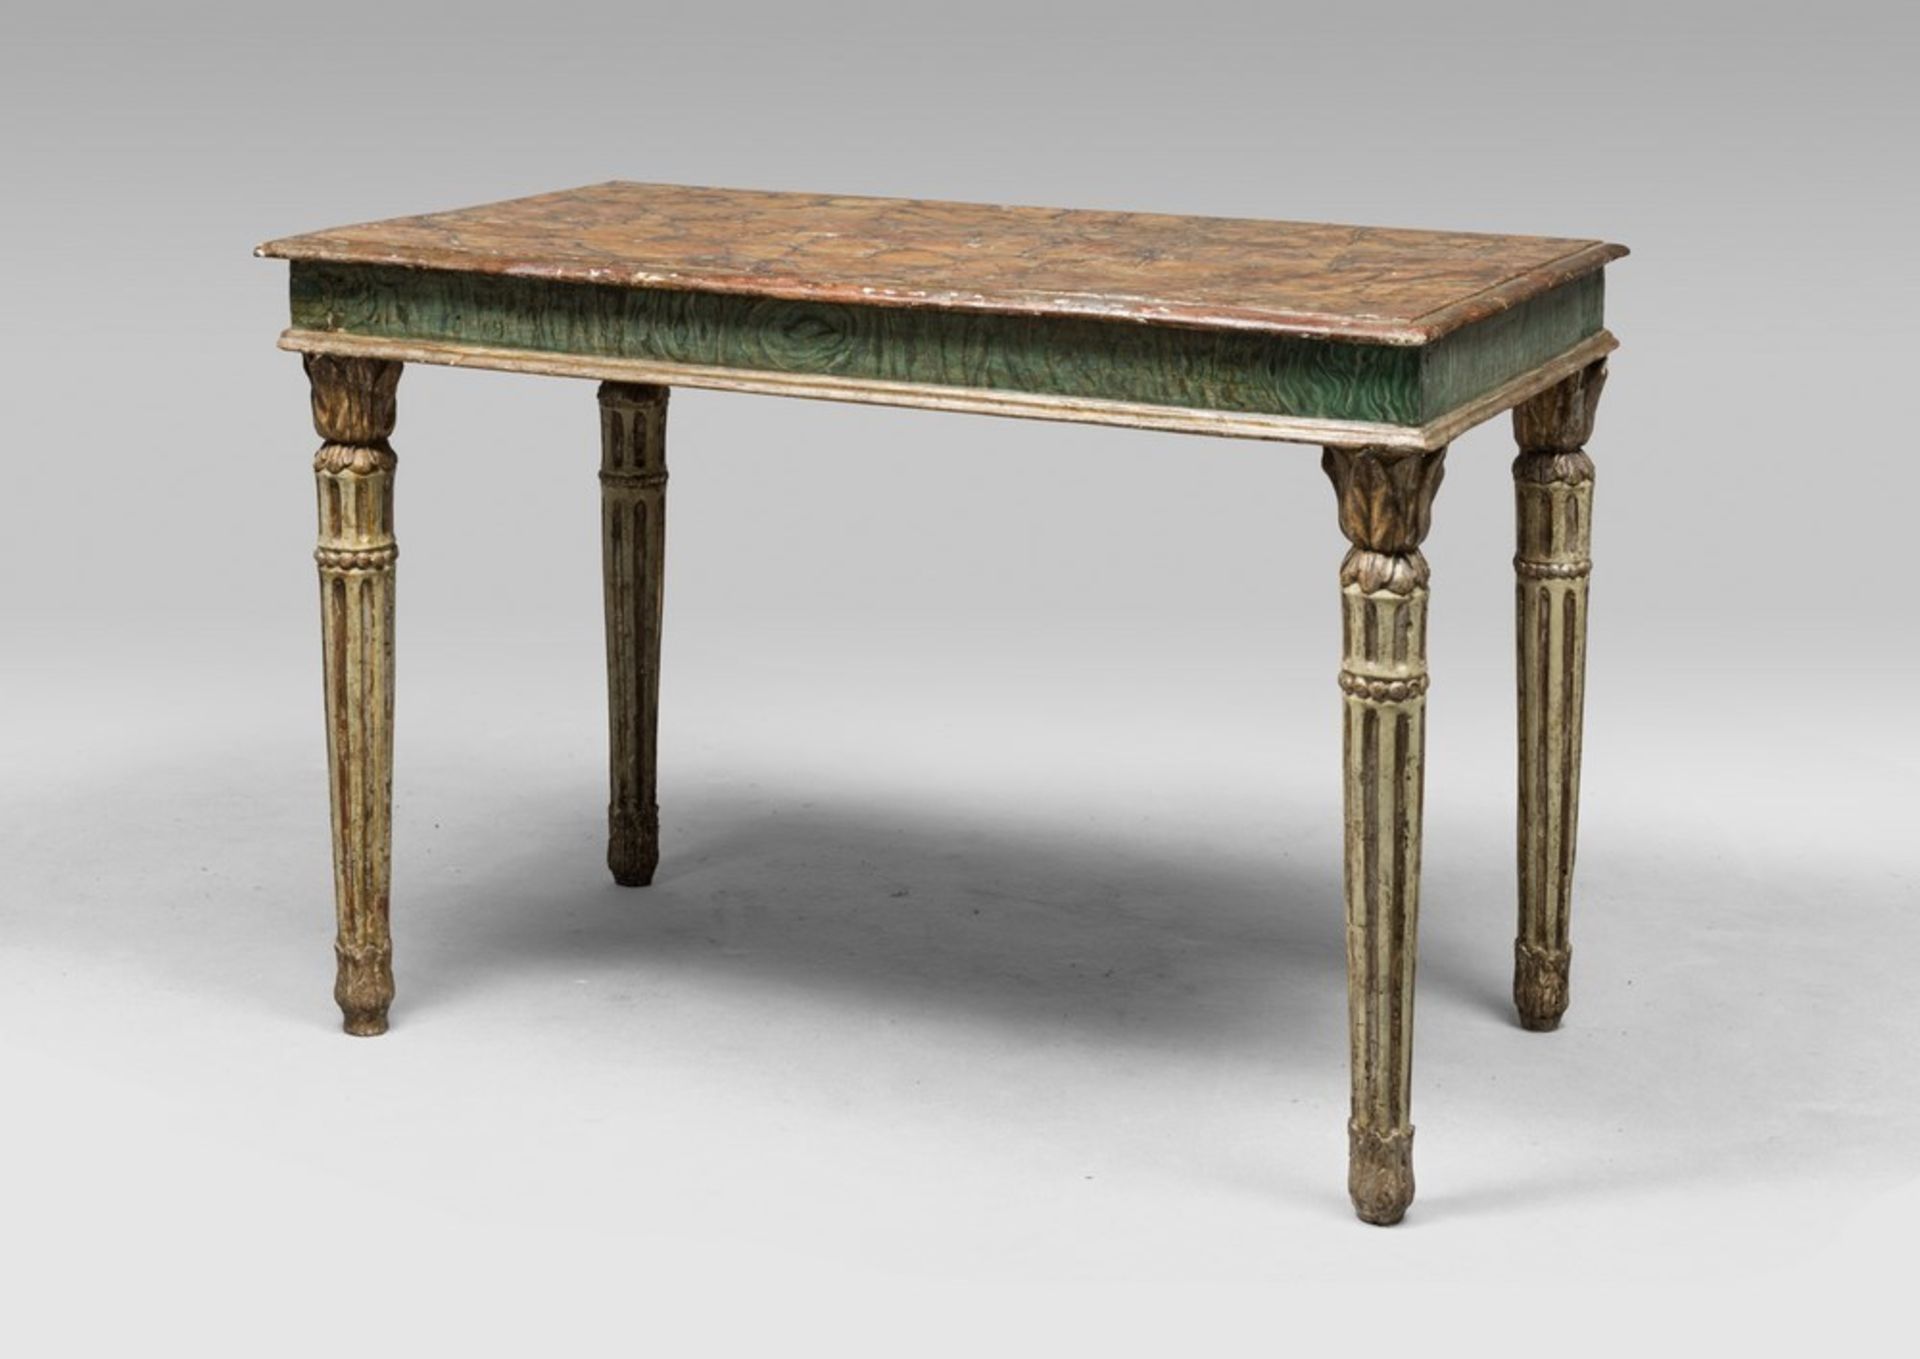 LACQUERED WOOD TABLE, CENTRAL ITALY 18TH CENTURY with rectangular planes with fake African marble.